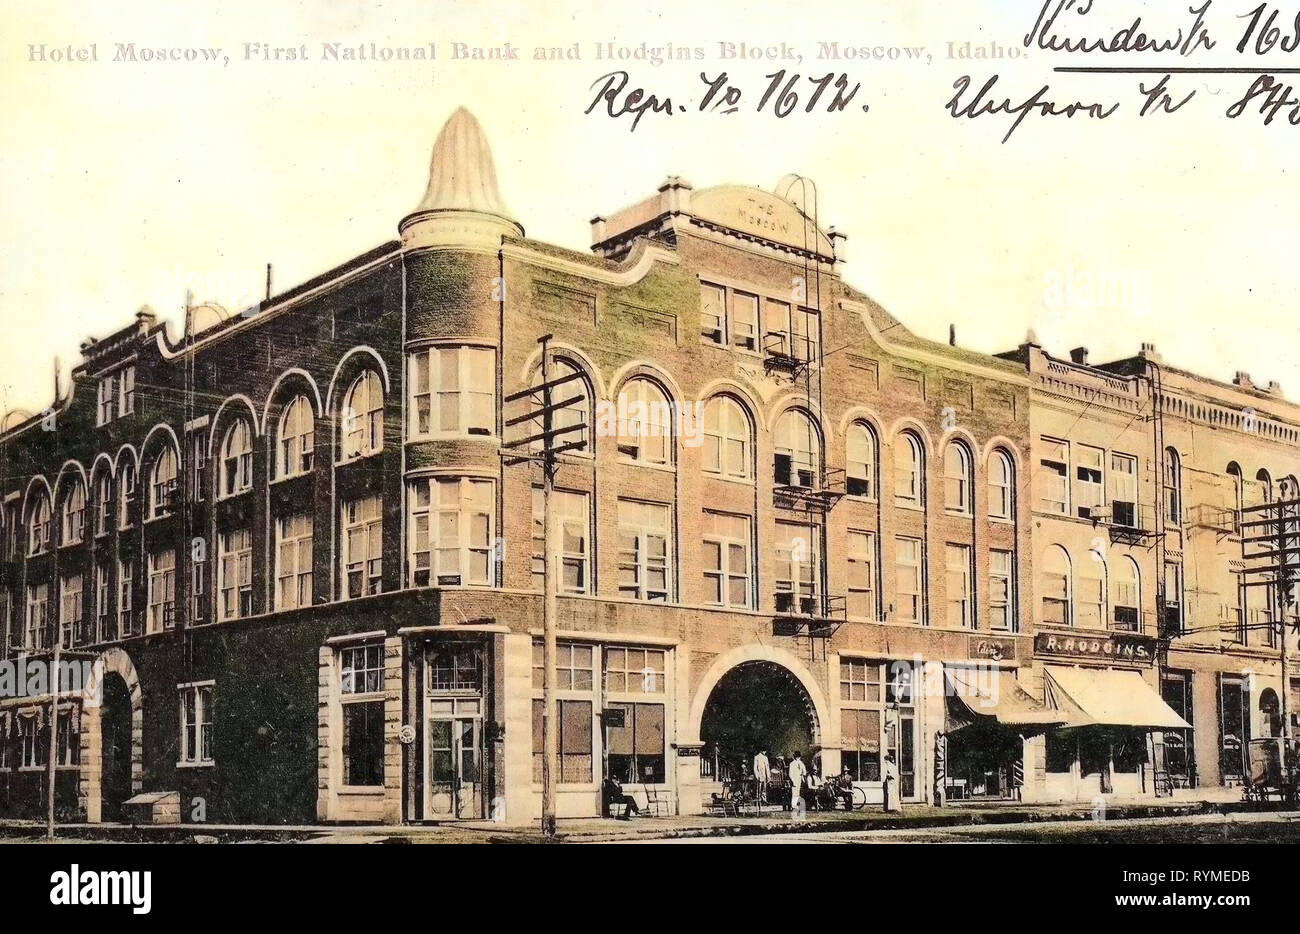 Hotels in Idaho, Shops in Idaho, Downtown Moscow, Idaho, 1906, Moscow, Hotel Moscow, First National Bank and Hodgins Block Stock Photo